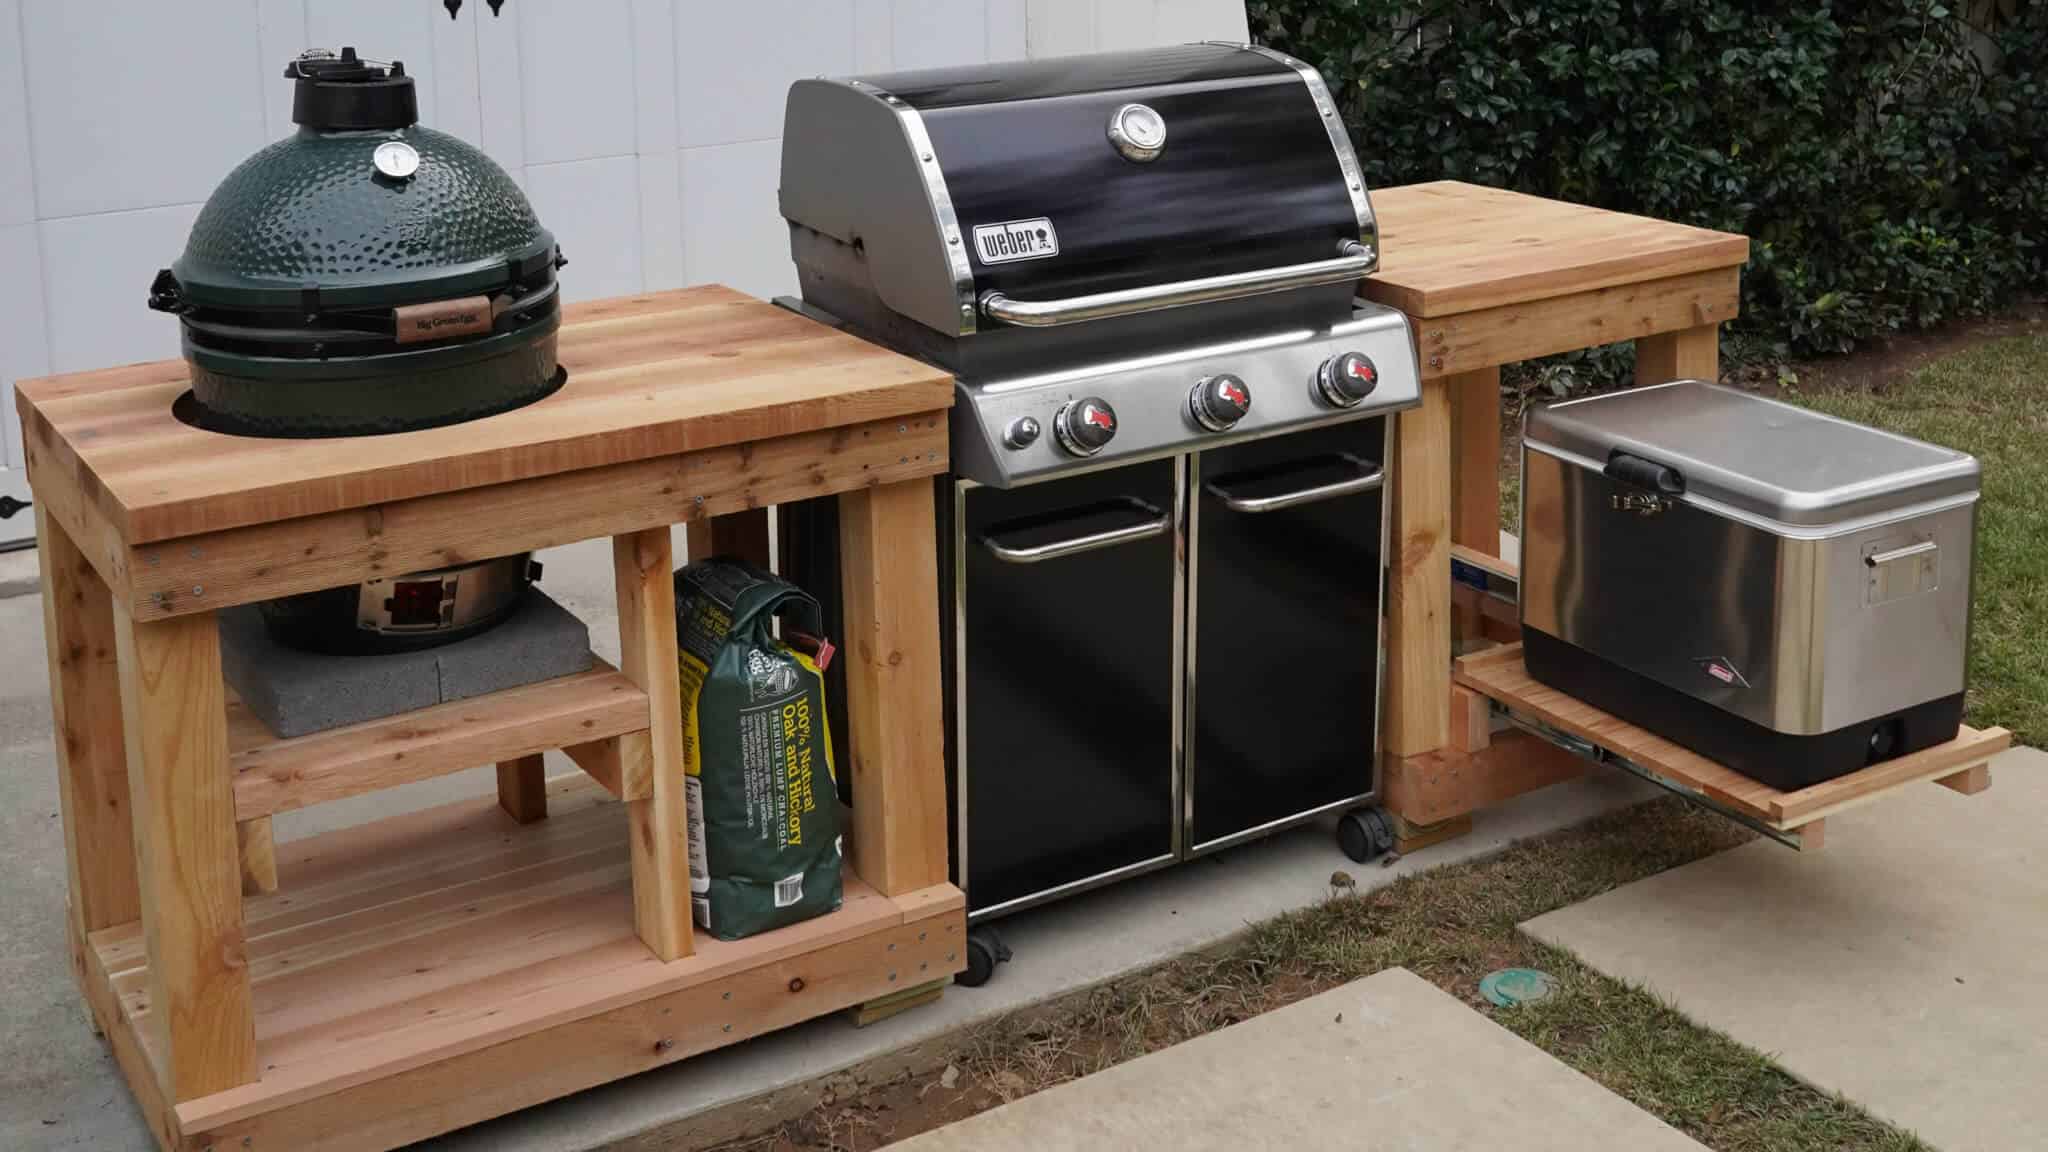 Grill island idea for an outdoor kitchen